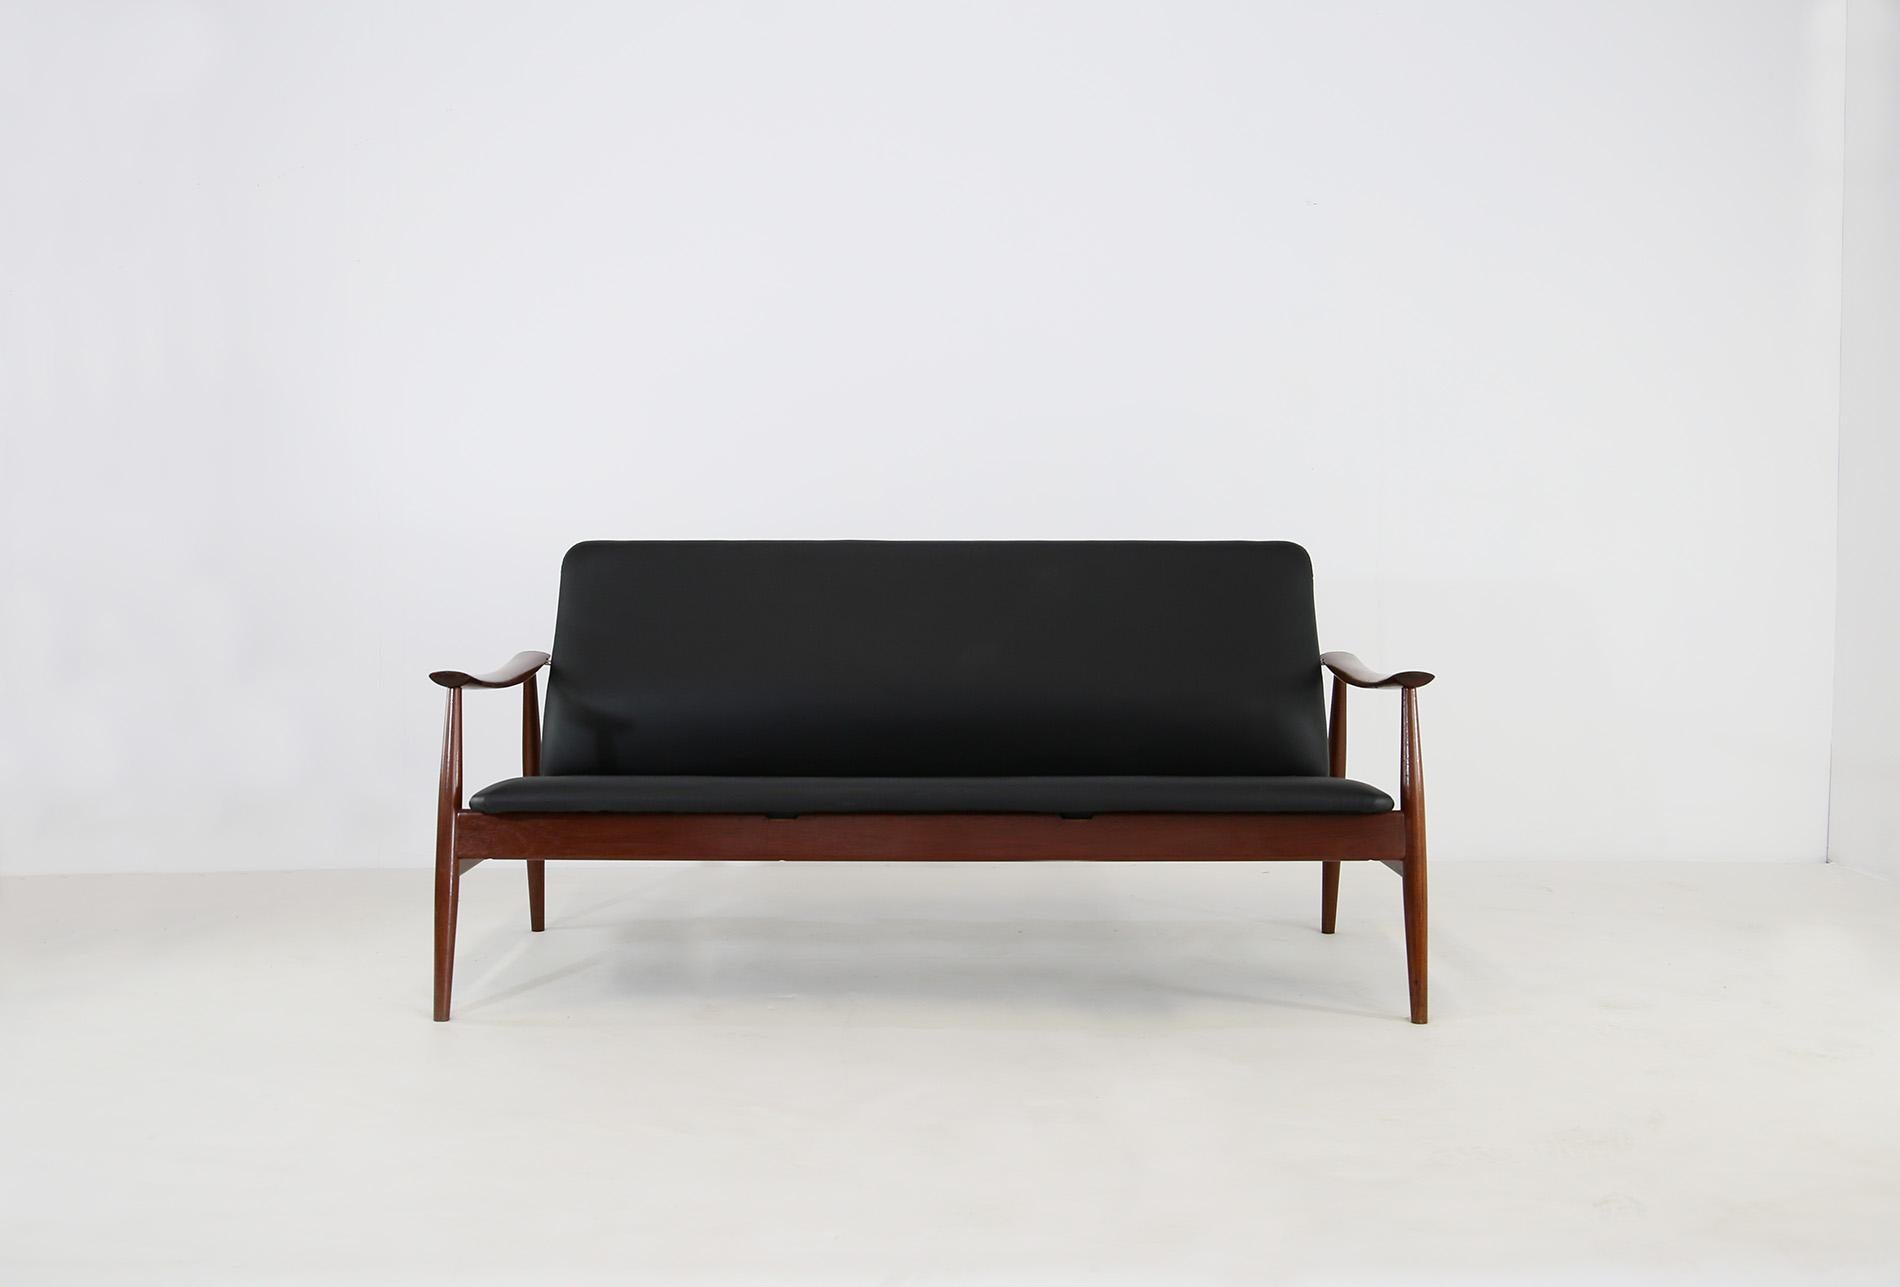 Lovely and comfortable two-seat sofa designed by Finn Juhl for the manufacture France & Søn Denmark in 1960. The sofa is the 138 model also known as the loveseat because of its small size in fact it can only contain two seats. The sofa has the